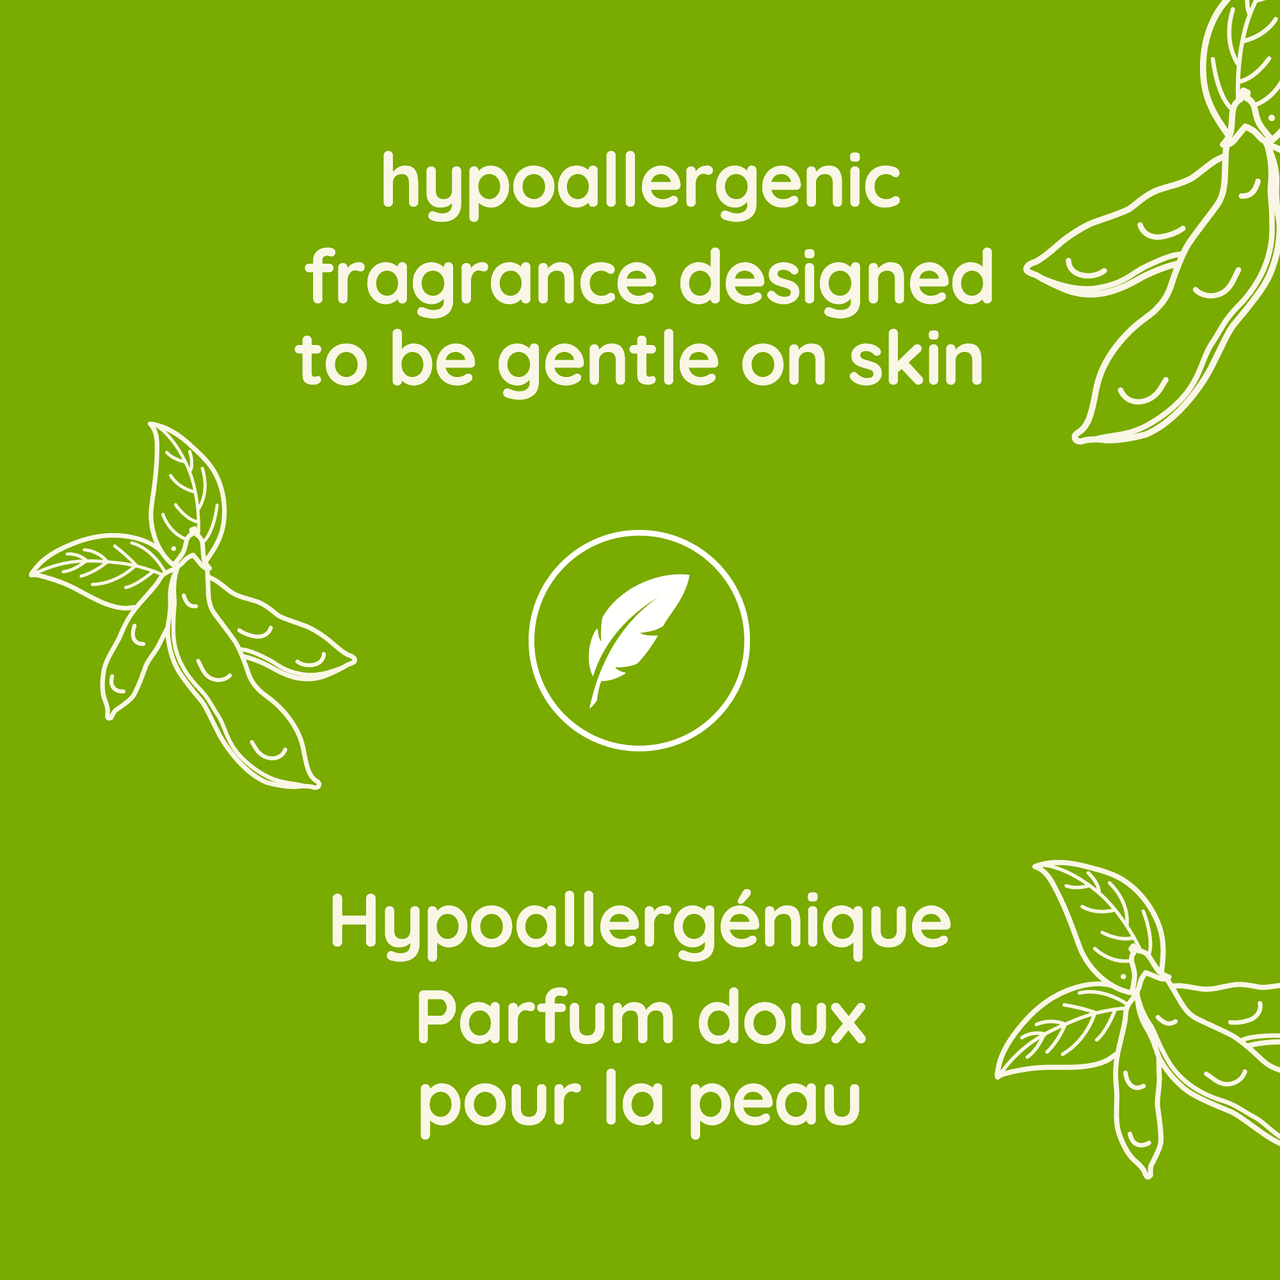 Text stating “hypoallergenic fragrance designed to be gentle on skin”